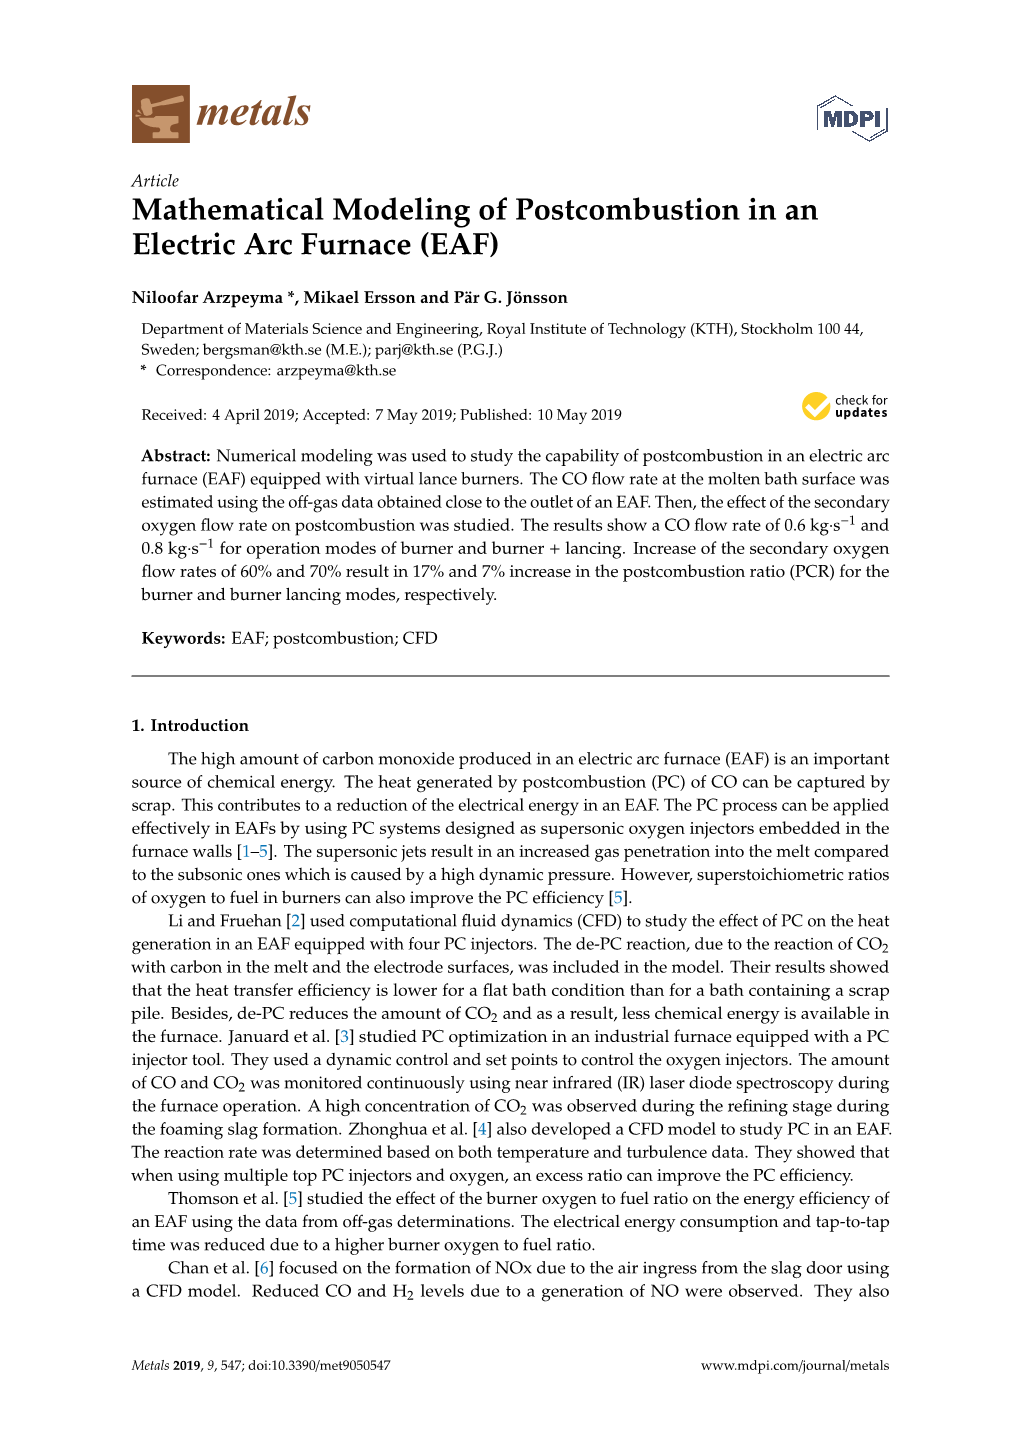 Mathematical Modeling of Postcombustion in an Electric Arc Furnace (EAF)